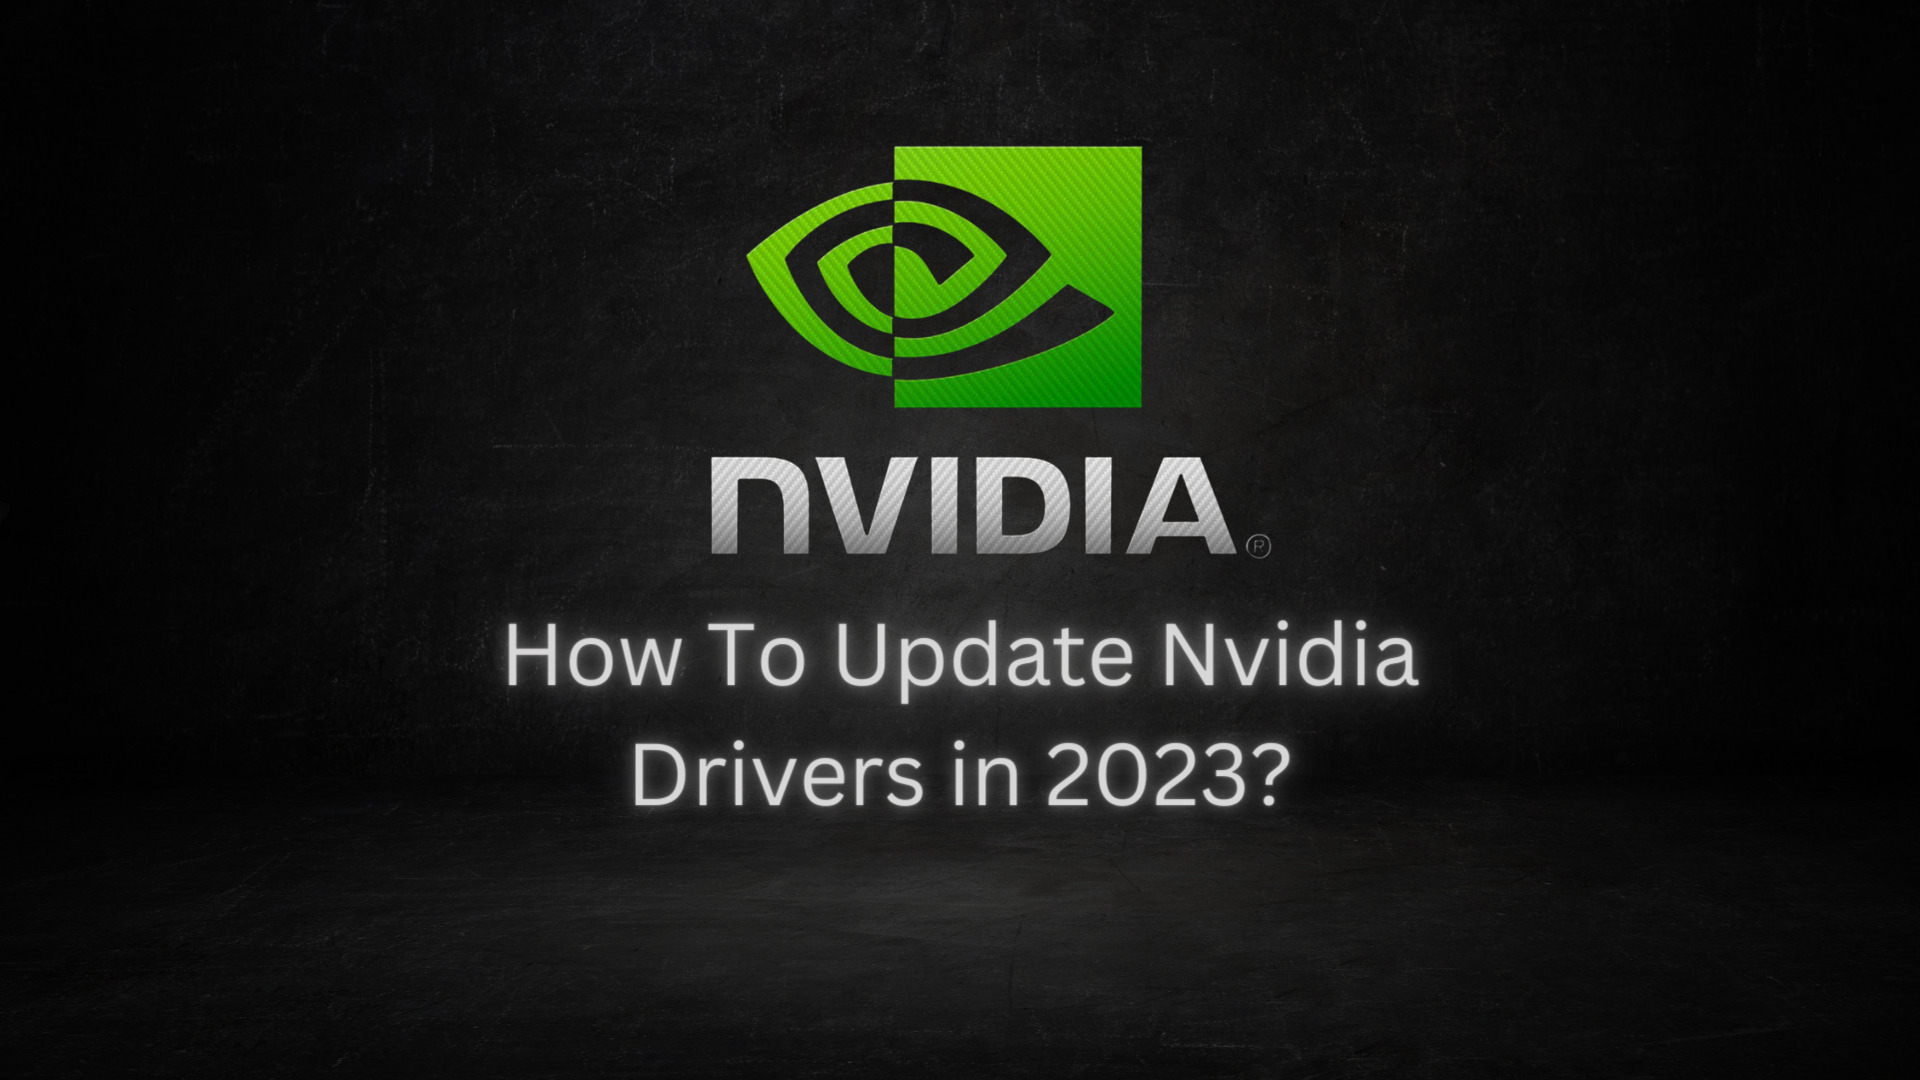 How To Update Nvidia Drivers In 2023 